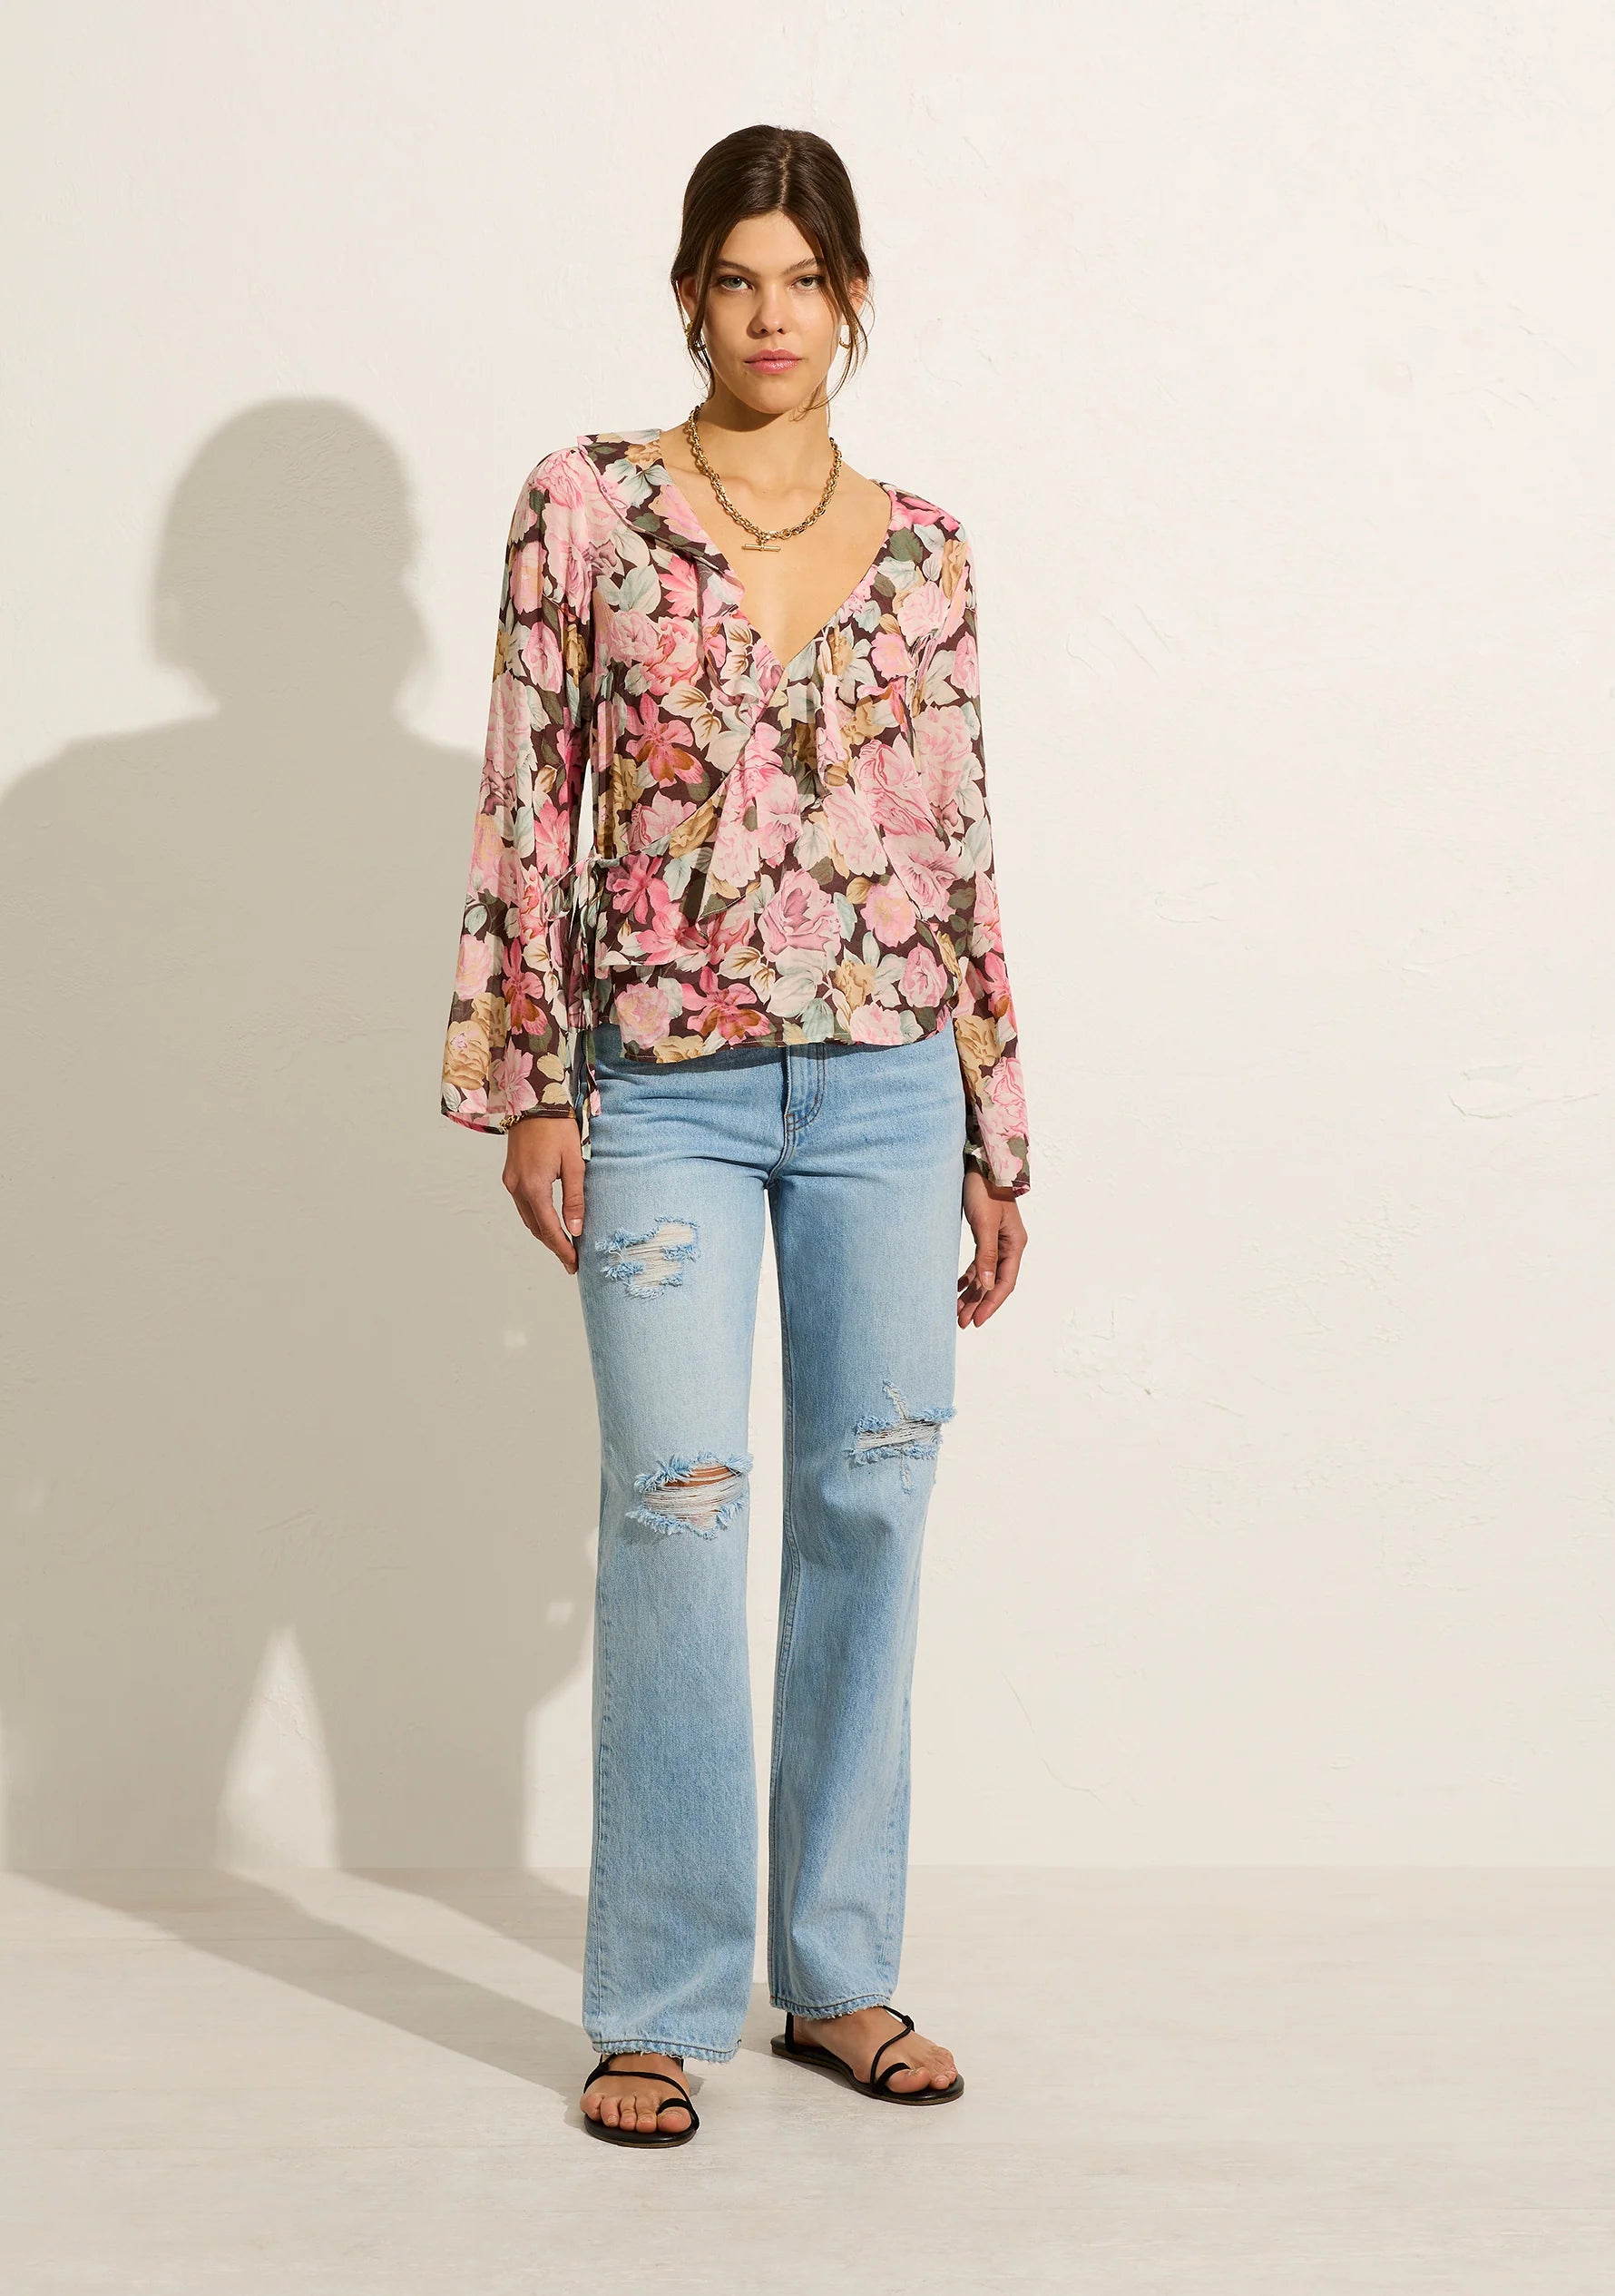 The Sophia Elda Wrap Blouse is crafted from a cotton blend in our feminine blush floral. Featuring a functional wrap design, a V neckline with ruffle details and a choir boy sleeve.